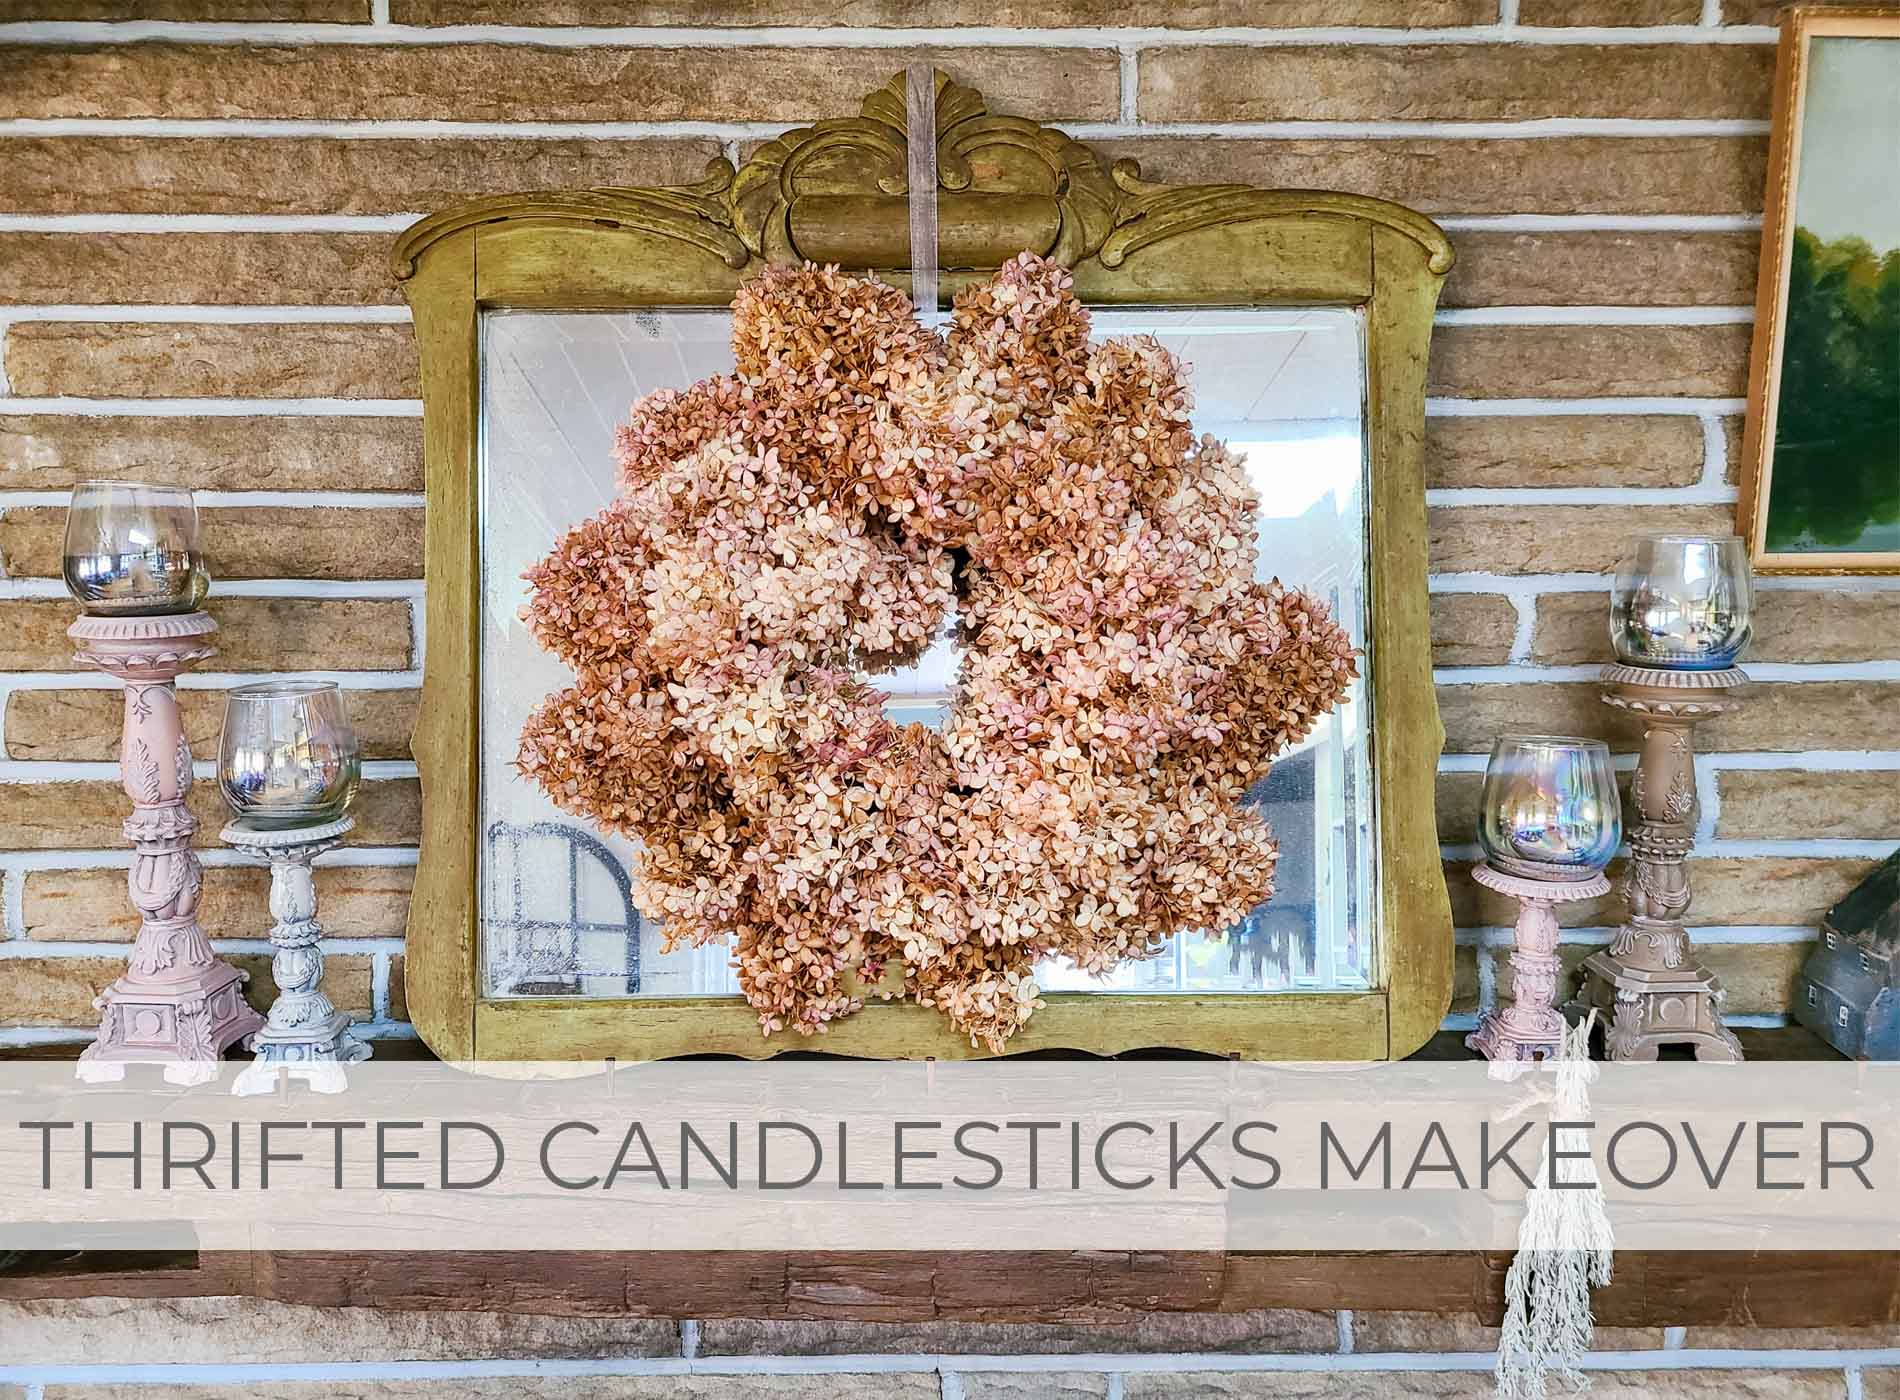 Thrifted Candlesticks Makeover by Larissa of Prodigal Pieces | prodigalpieces.com #prodigalpieces